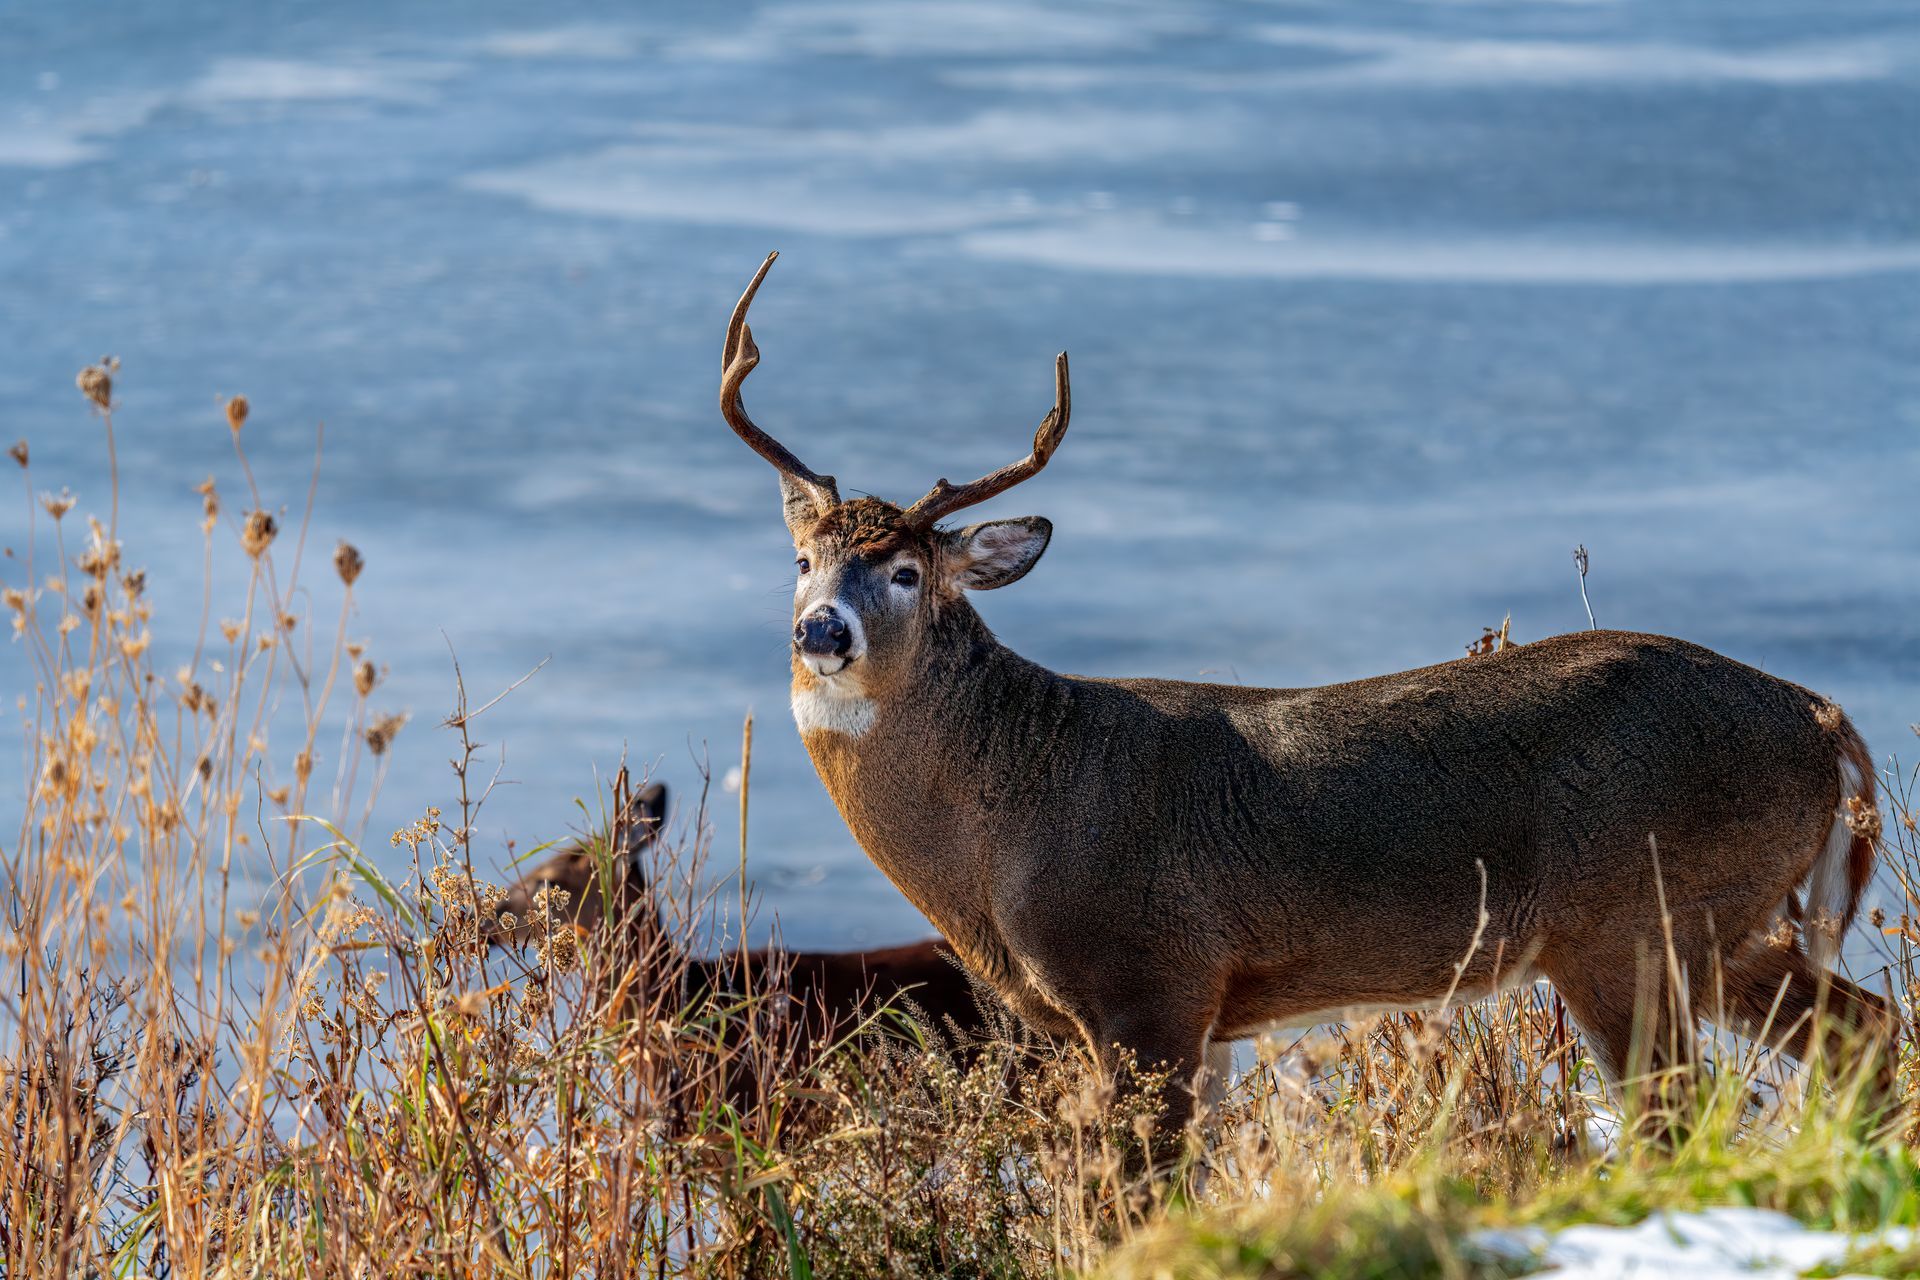 a couple of deer standing next to a body of water .